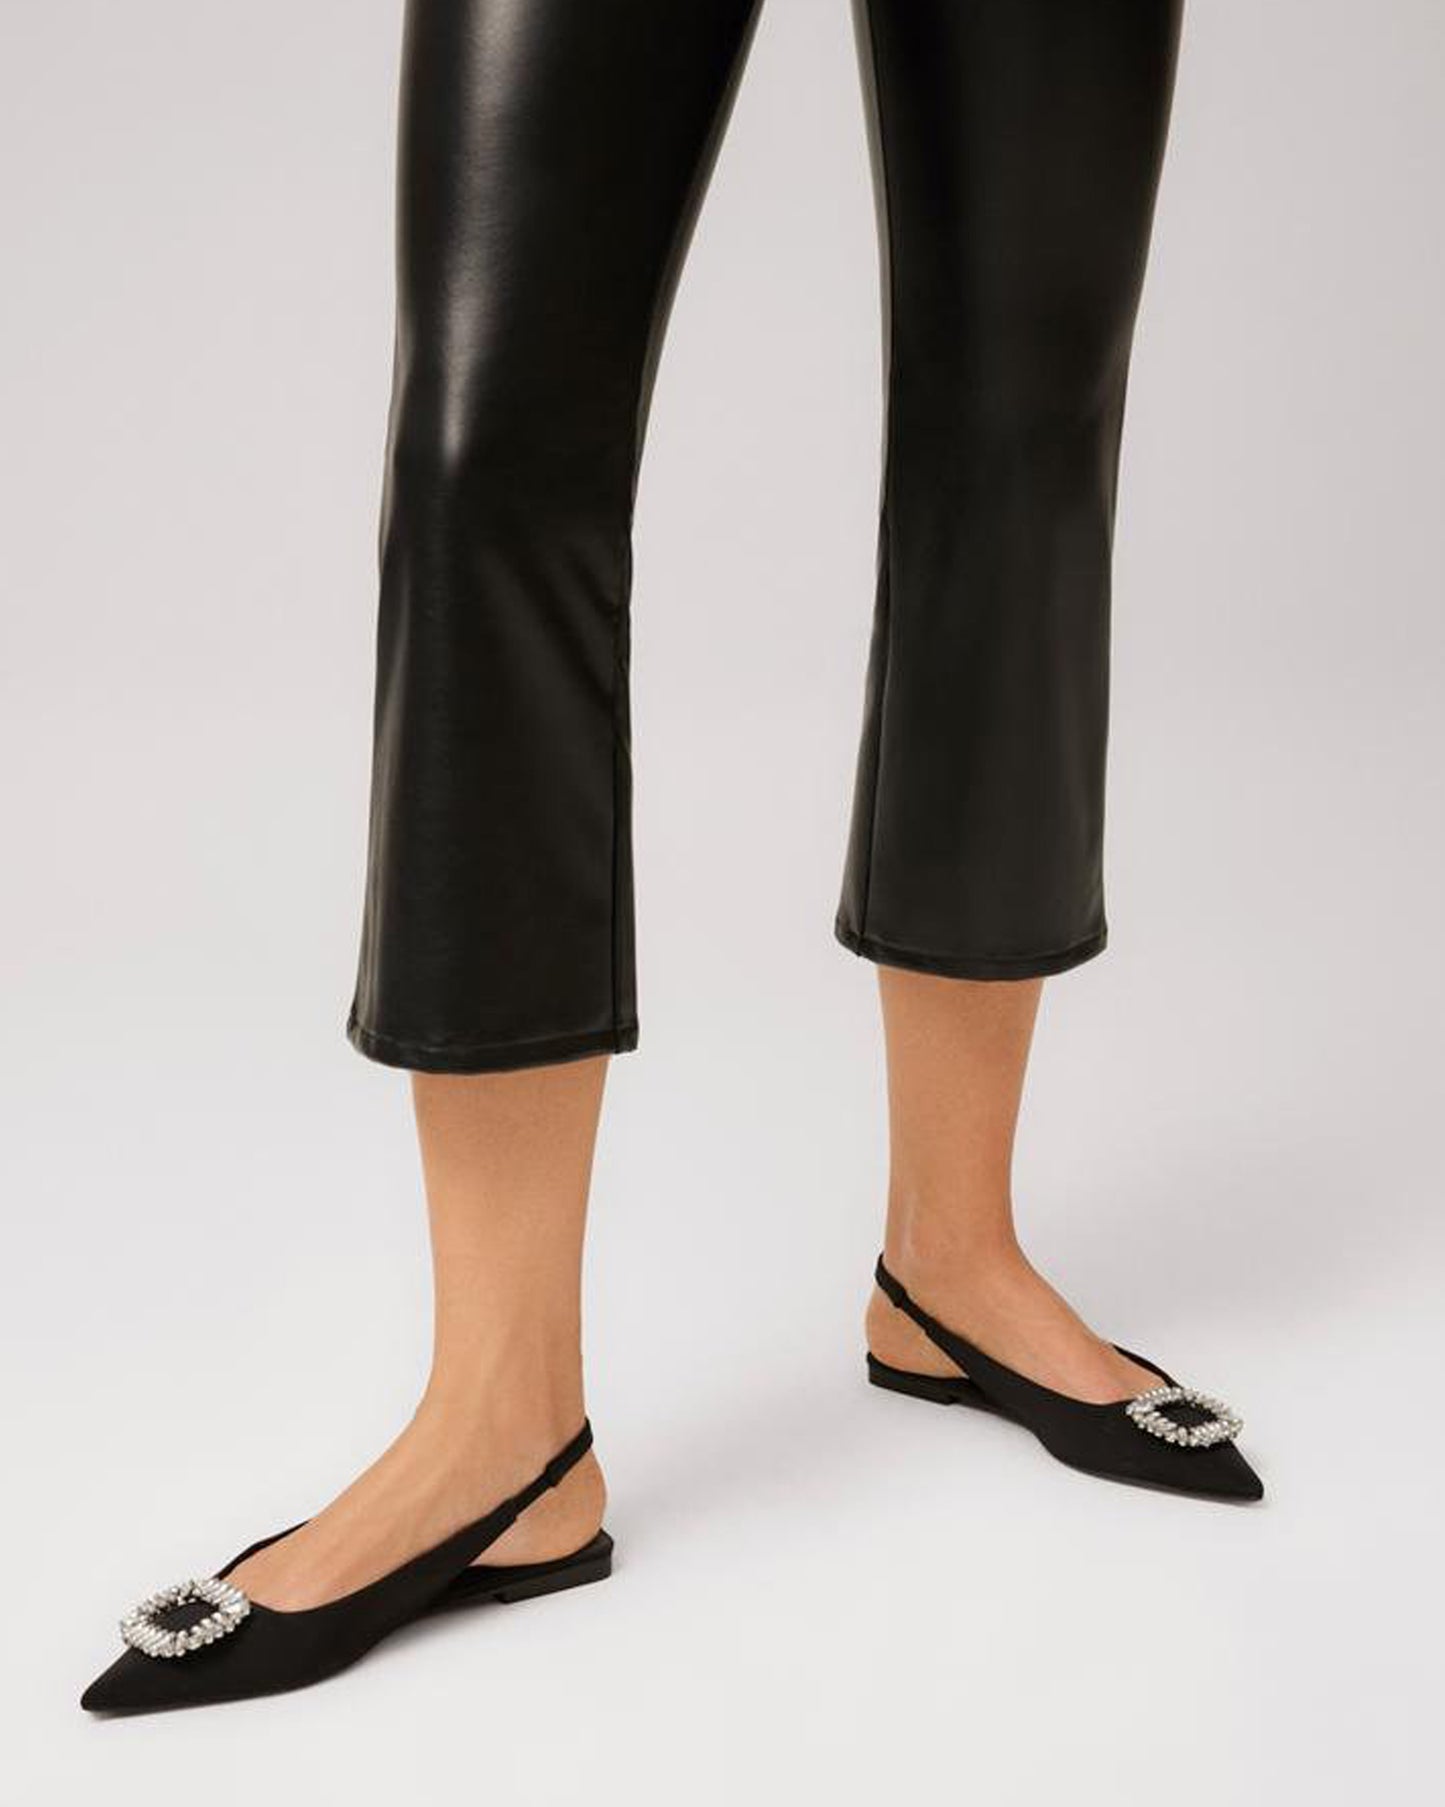 Ysabel Mora 70296 Faux Leather Cropped Pants - Black flared crop faux leather thermal leggings with a soft and warm plush lining. Ysabel Mora 70296 Faux Leather Cropped Pants - Black flared crop faux leather thermal leggings with a soft and warm plush lining. Worn with sling back pointed jewelled shoes.